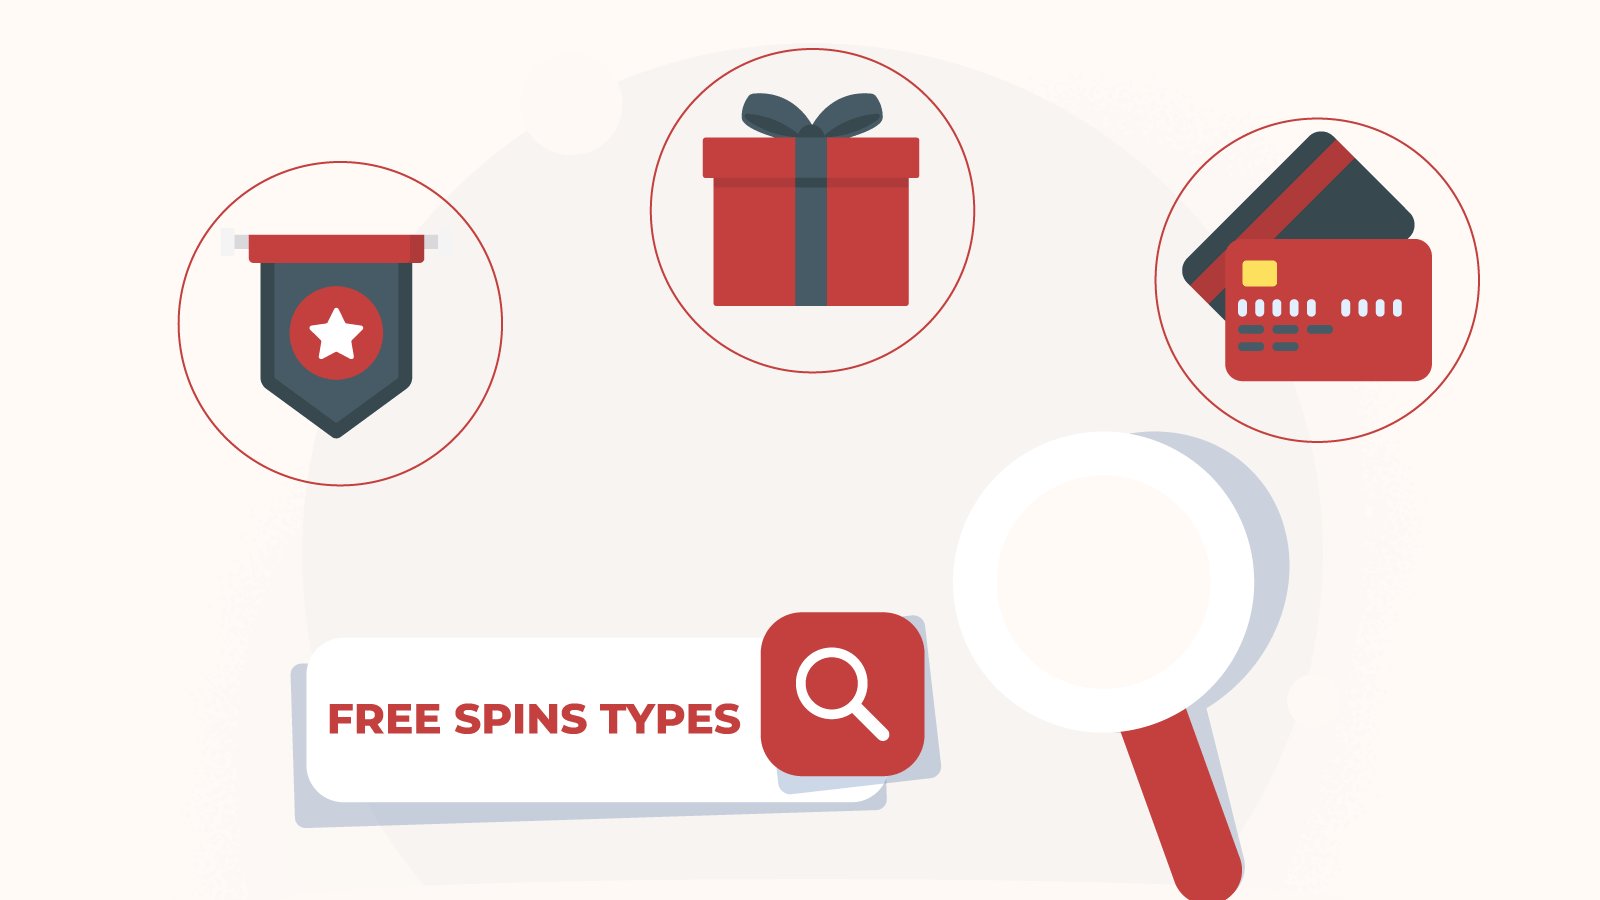 Types of Existing Customer Free Spins 2021 & 2022 Had & Have